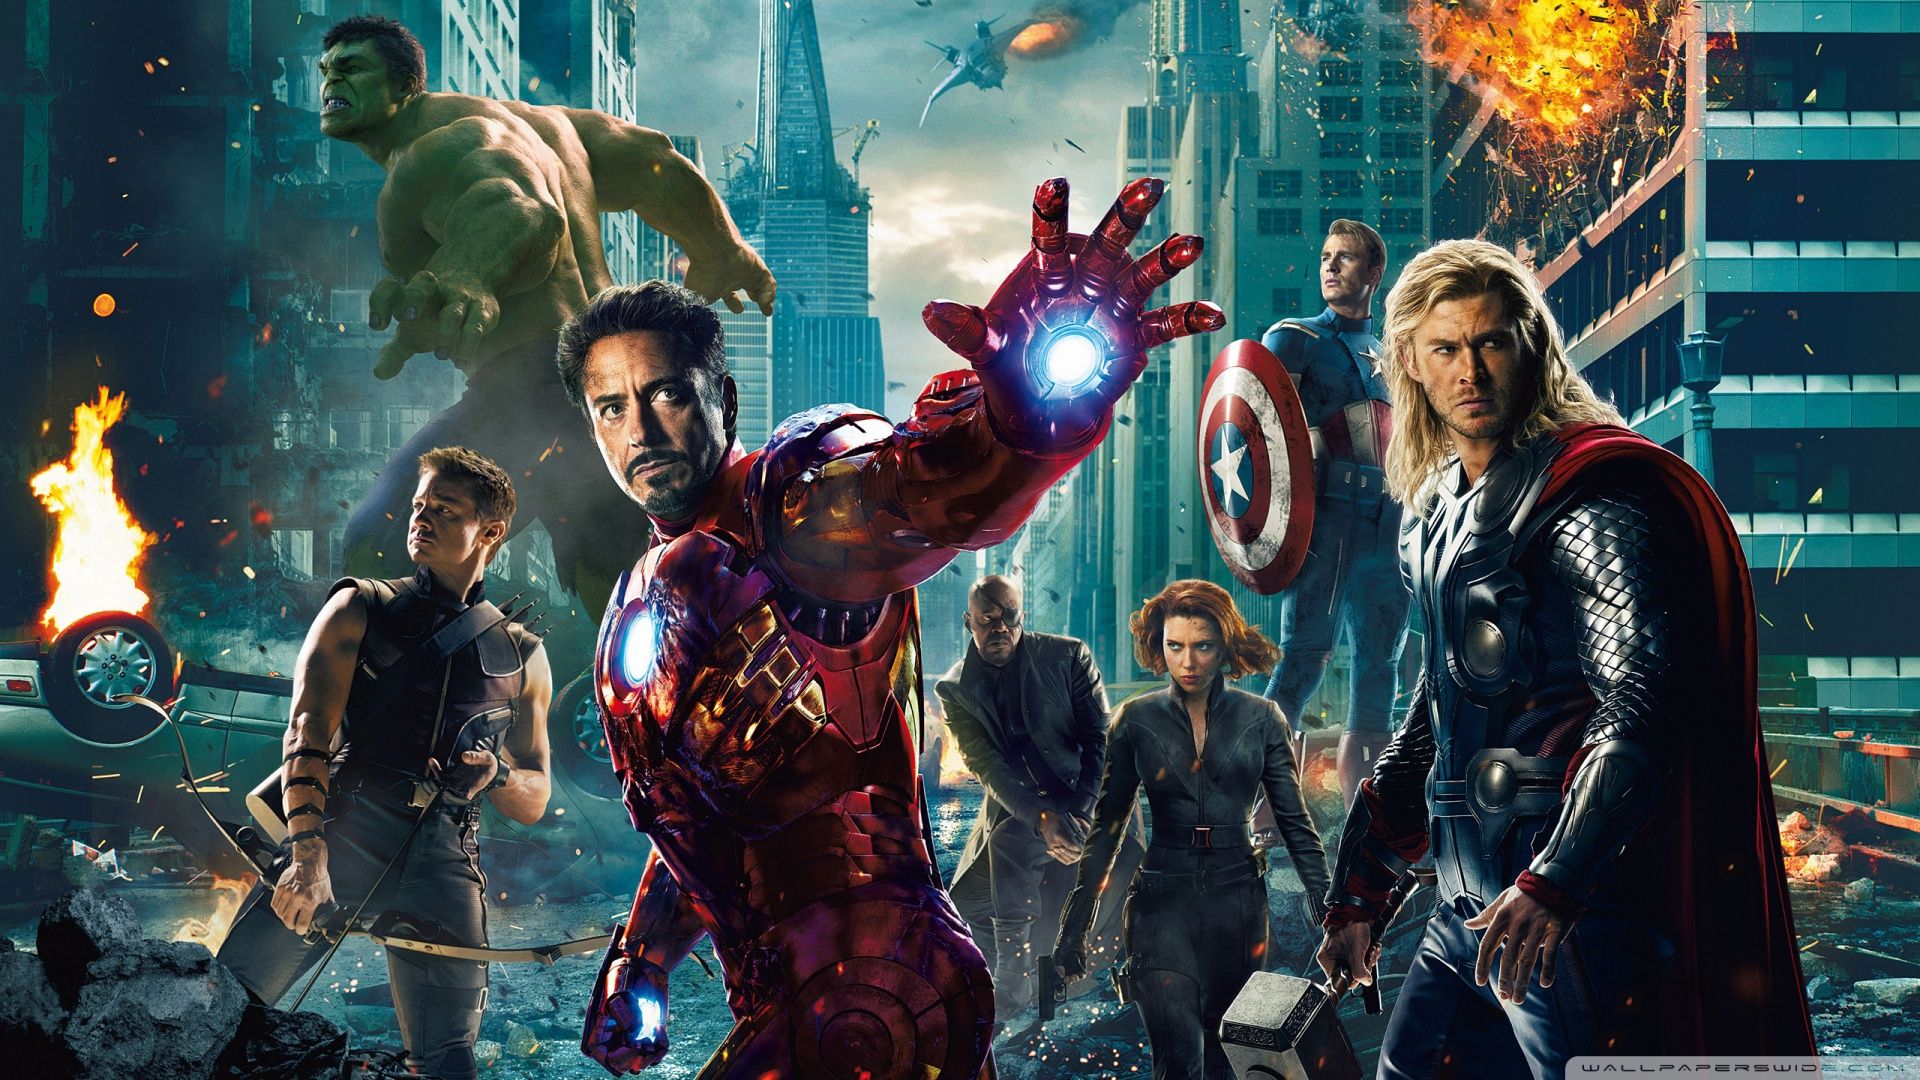 Free download Marvel Live action Movies image the avengers HD wallpaper and [1920x1080] for your Desktop, Mobile & Tablet. Explore Marvel Movies Wallpaper. Marvel Movies Wallpaper, Movies Wallpaper, Wallpaper Movies